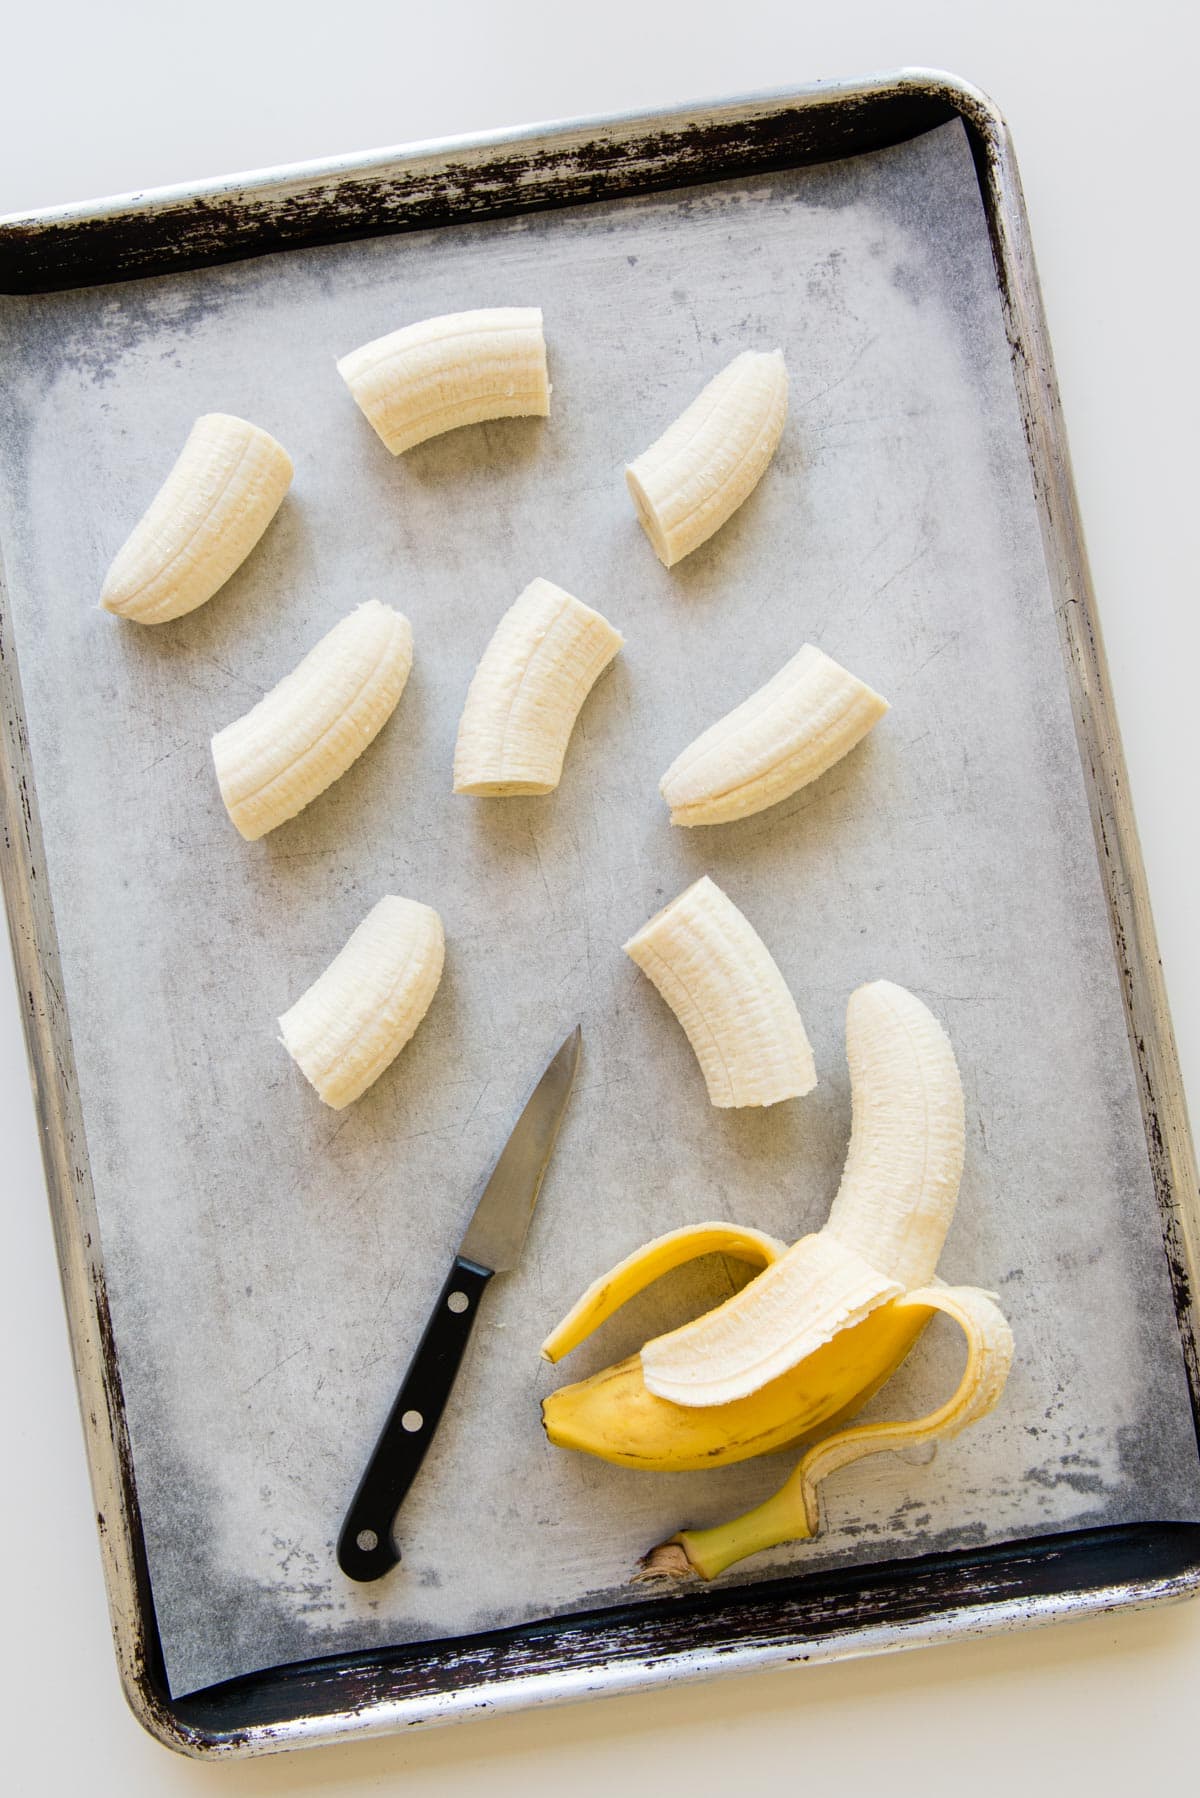 chopped banana pieces on a parchment lined tray.